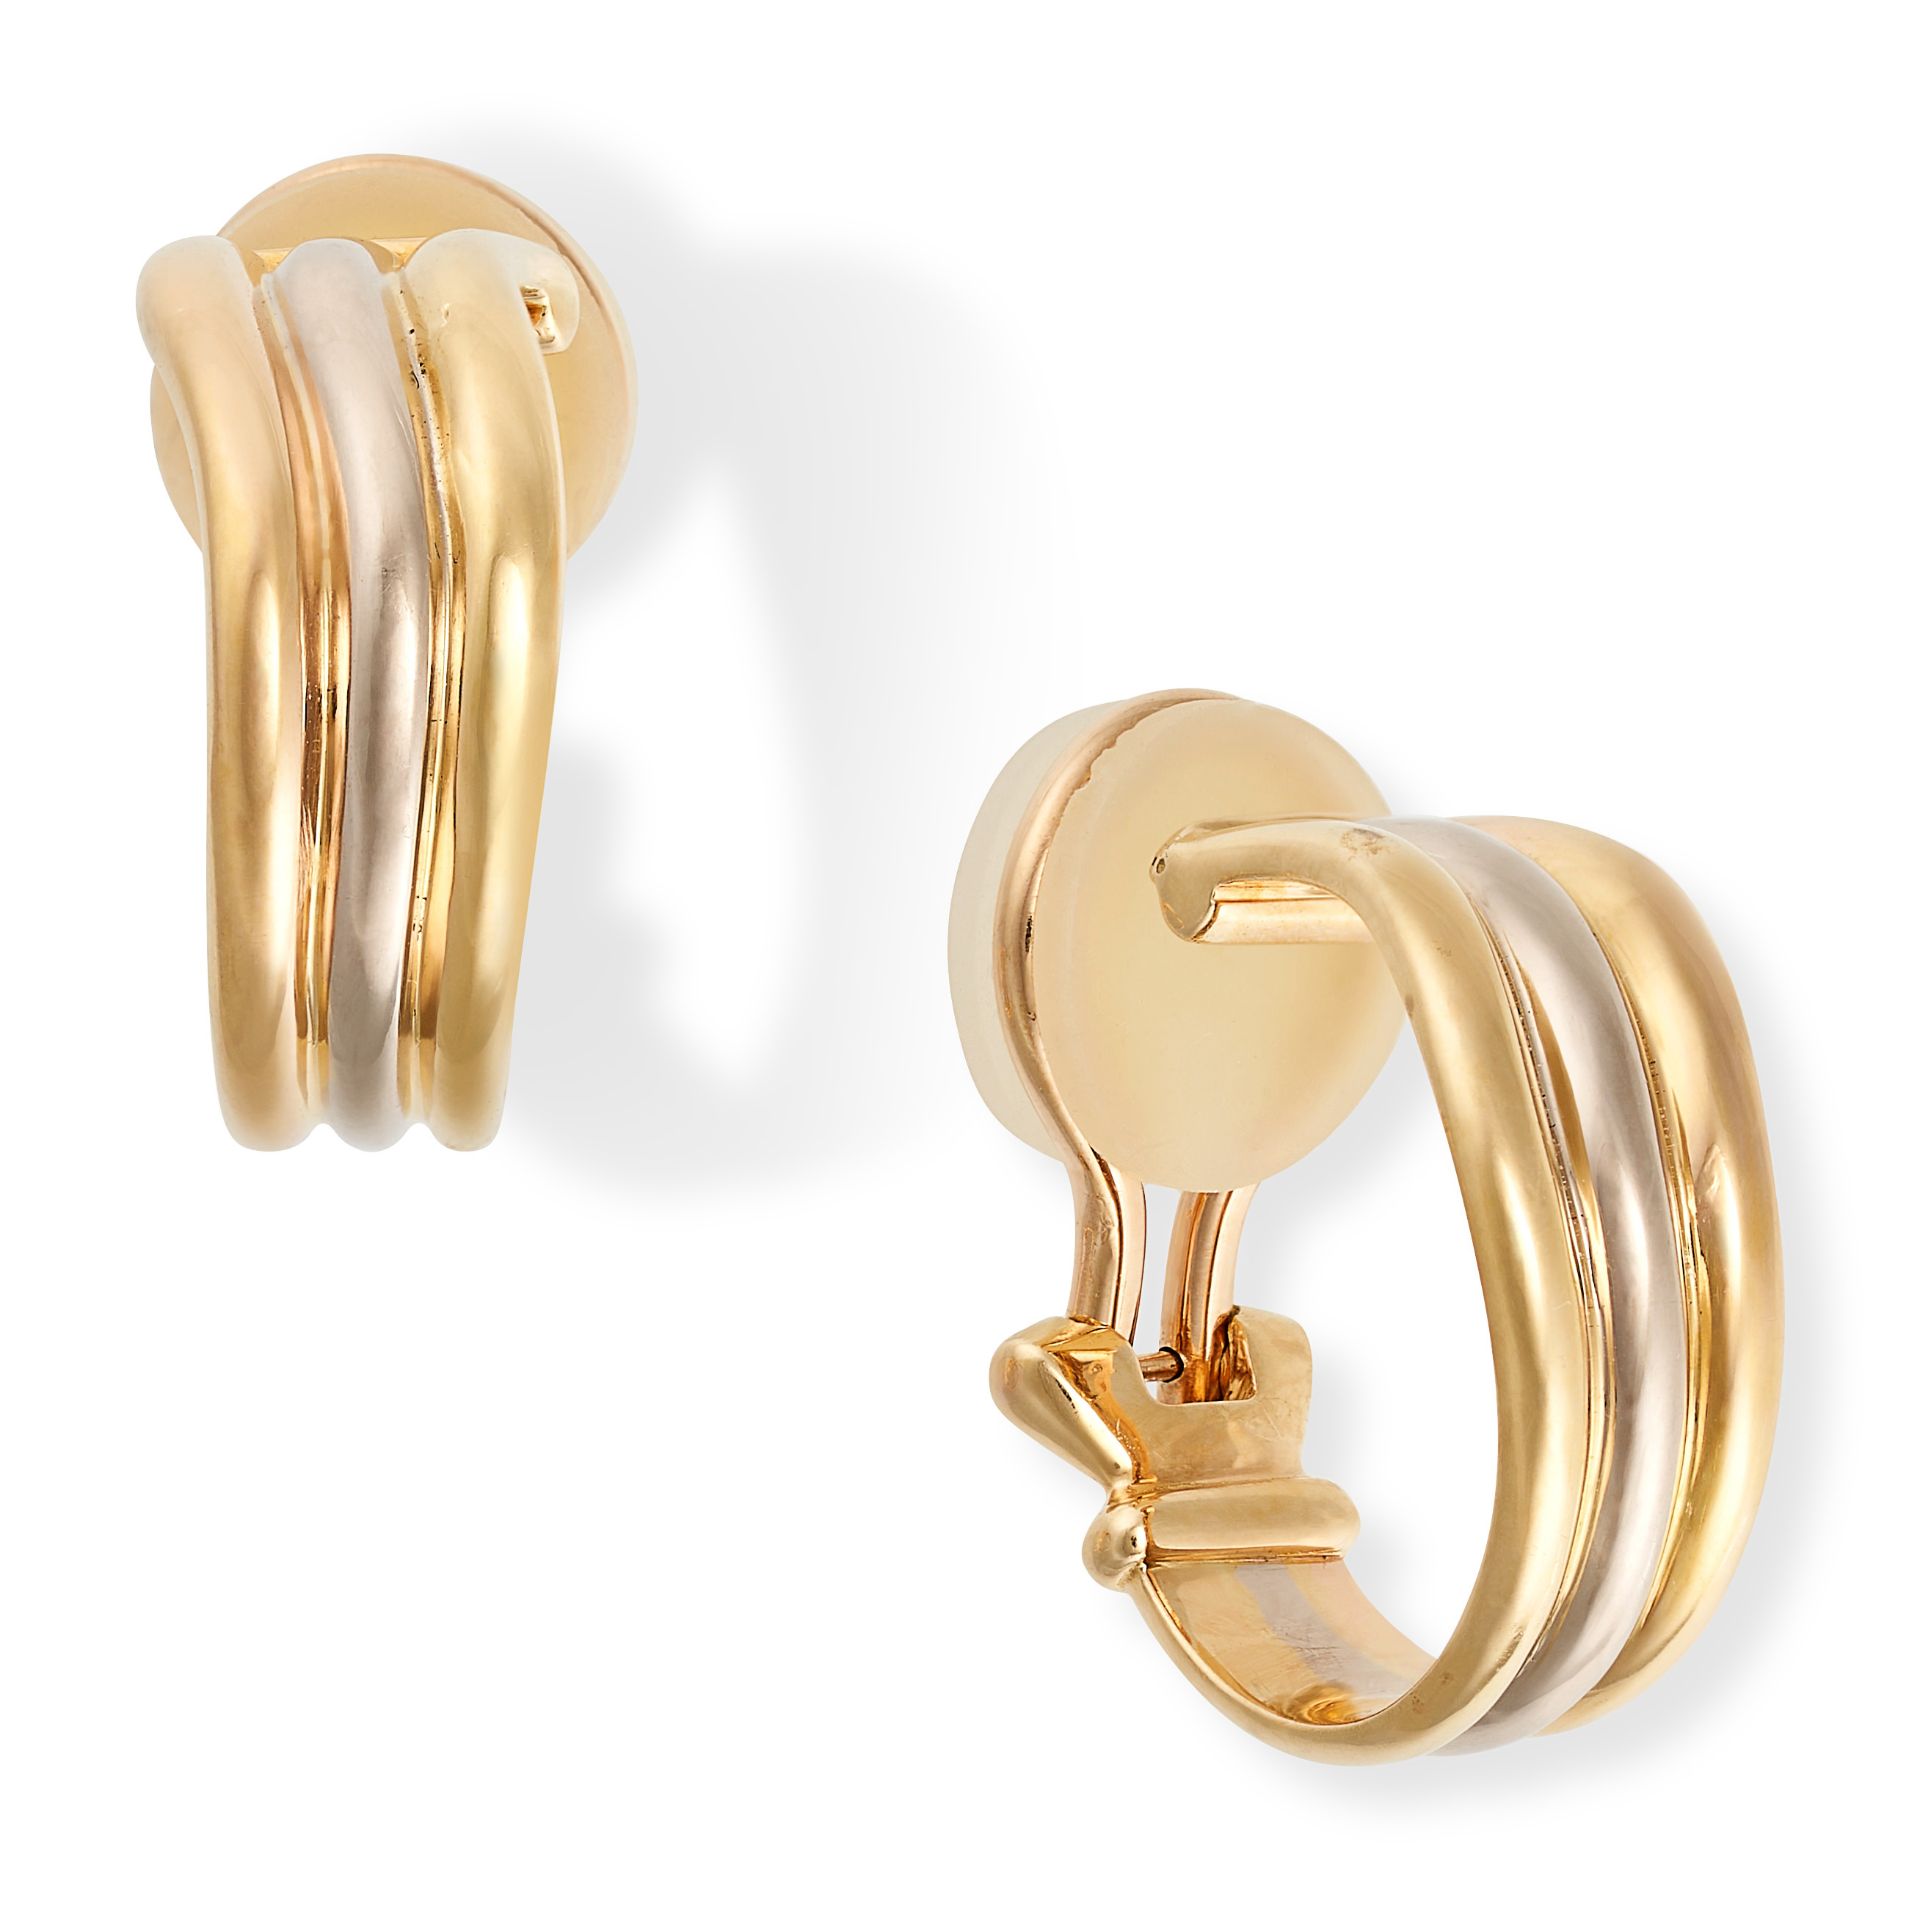 CARTIER, A PAIR OF TRINITY GOLD HOOP EARRINGS in 18ct yellow, rose and white gold, designed as a ...